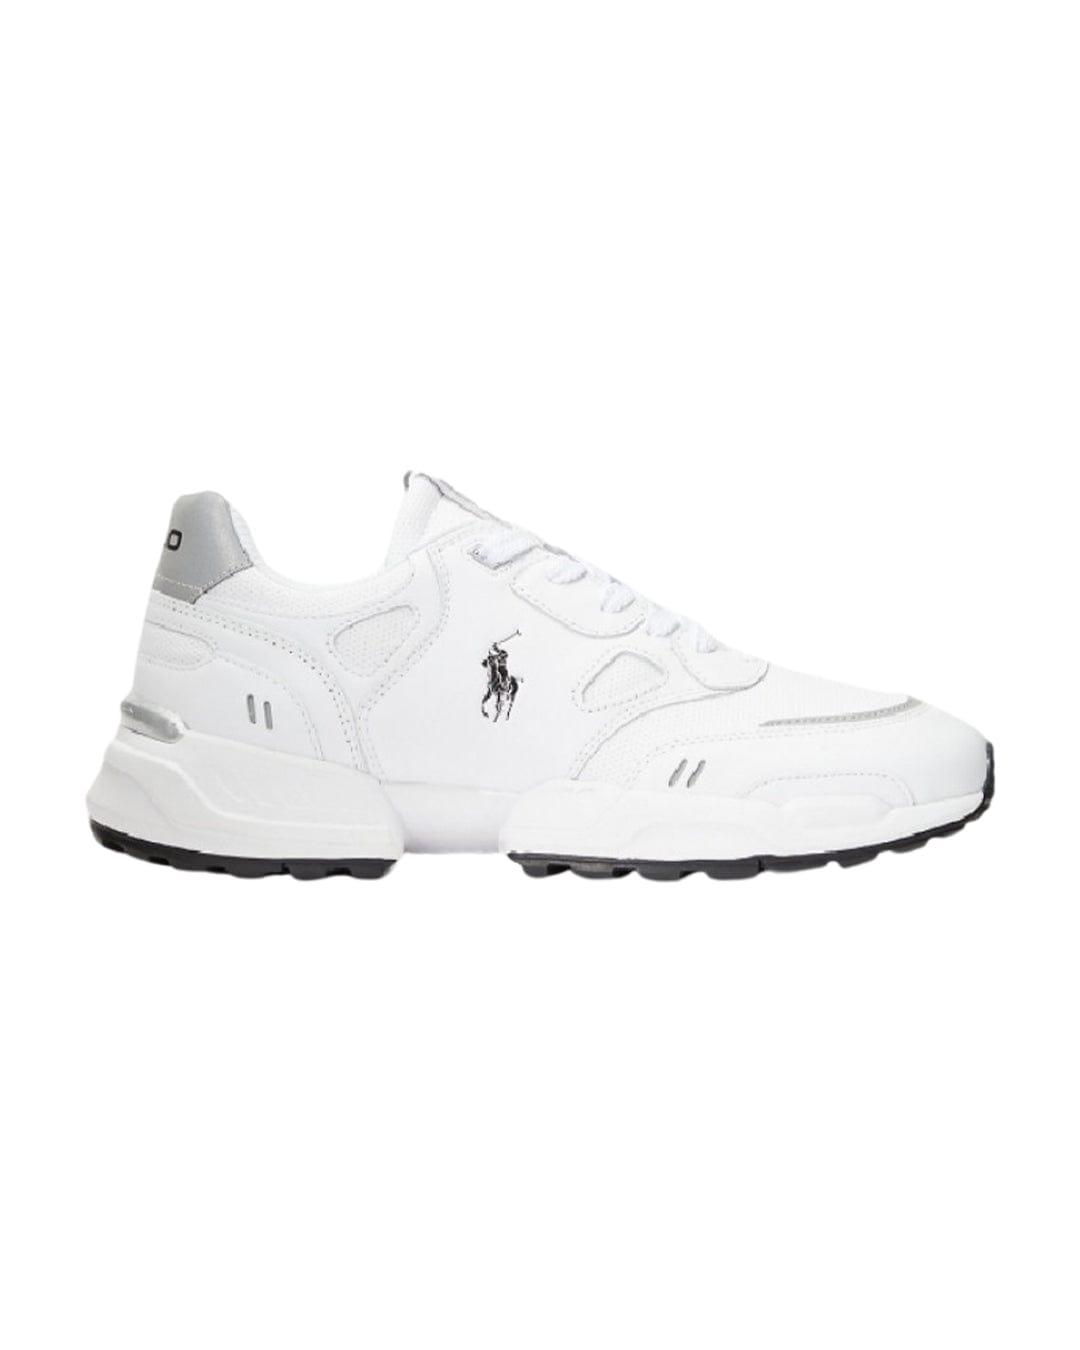 Polo Ralph Lauren Shoes Polo Ralph Lauren Court White Leather Sneakers